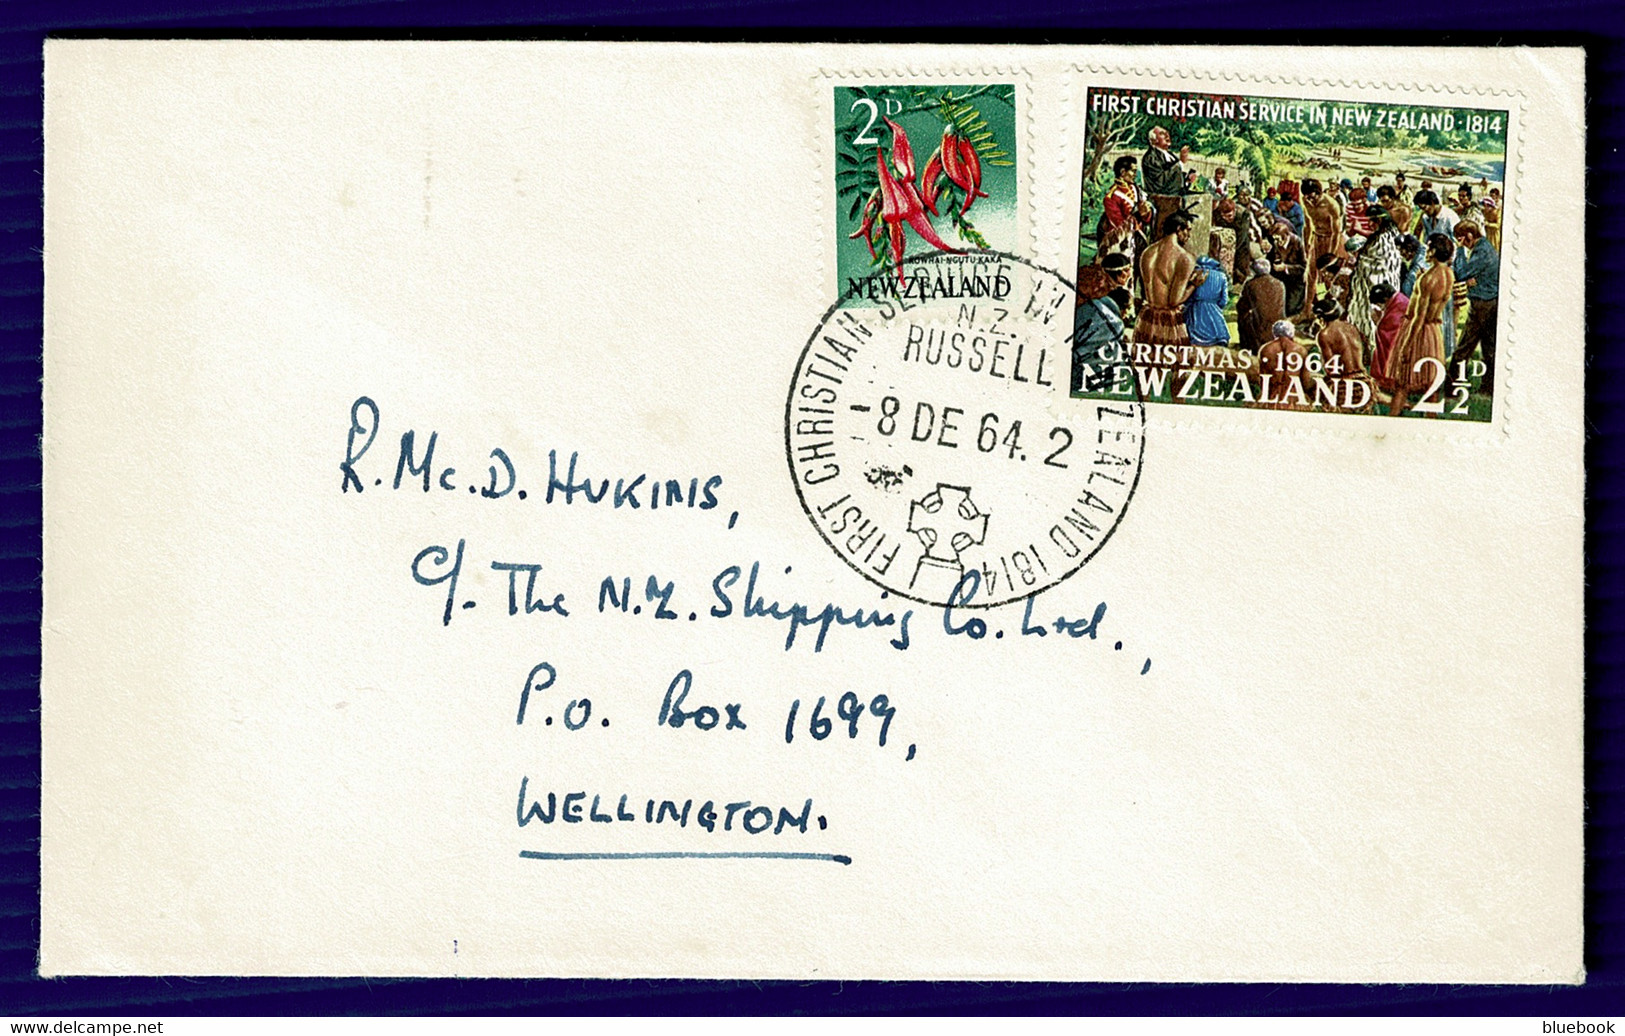 Ref 1581 - New Zealand 1964 Cover - 150th Anniversary First Christian Service - Russell - Covers & Documents